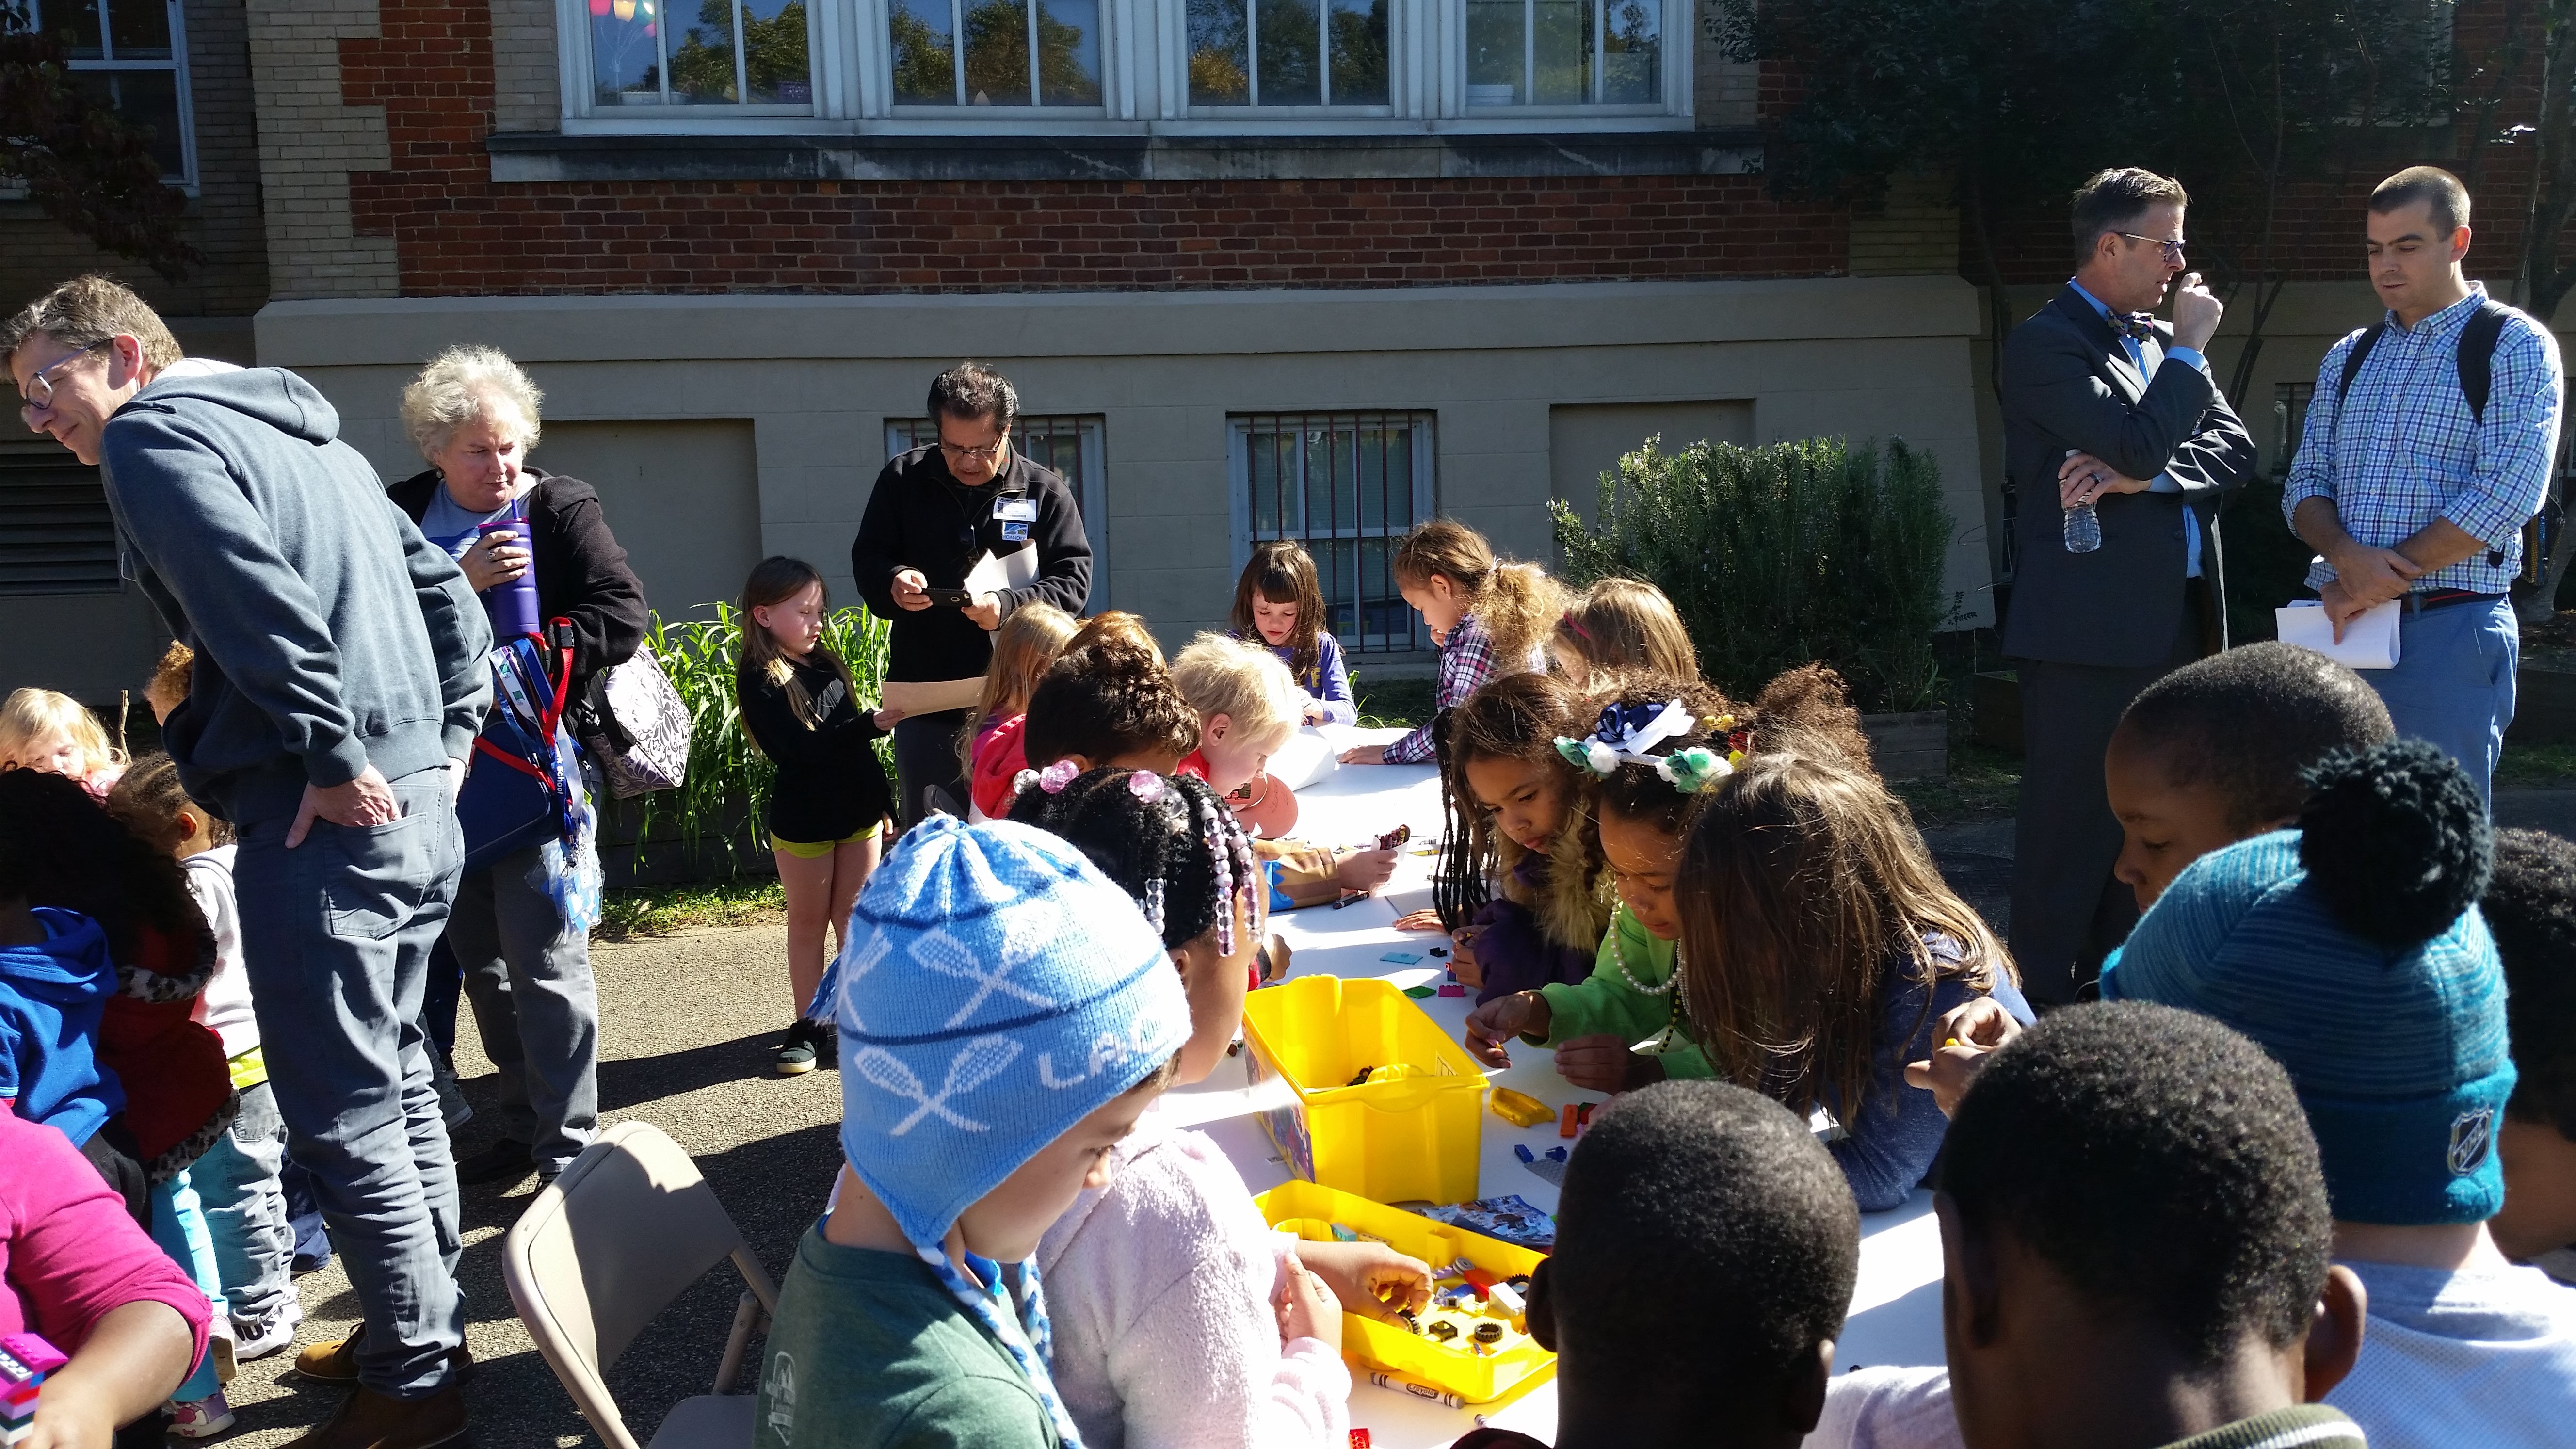 Students drawing and using building blocks during Highland Park Elementary’s Healthy Choices/Safe Community Day